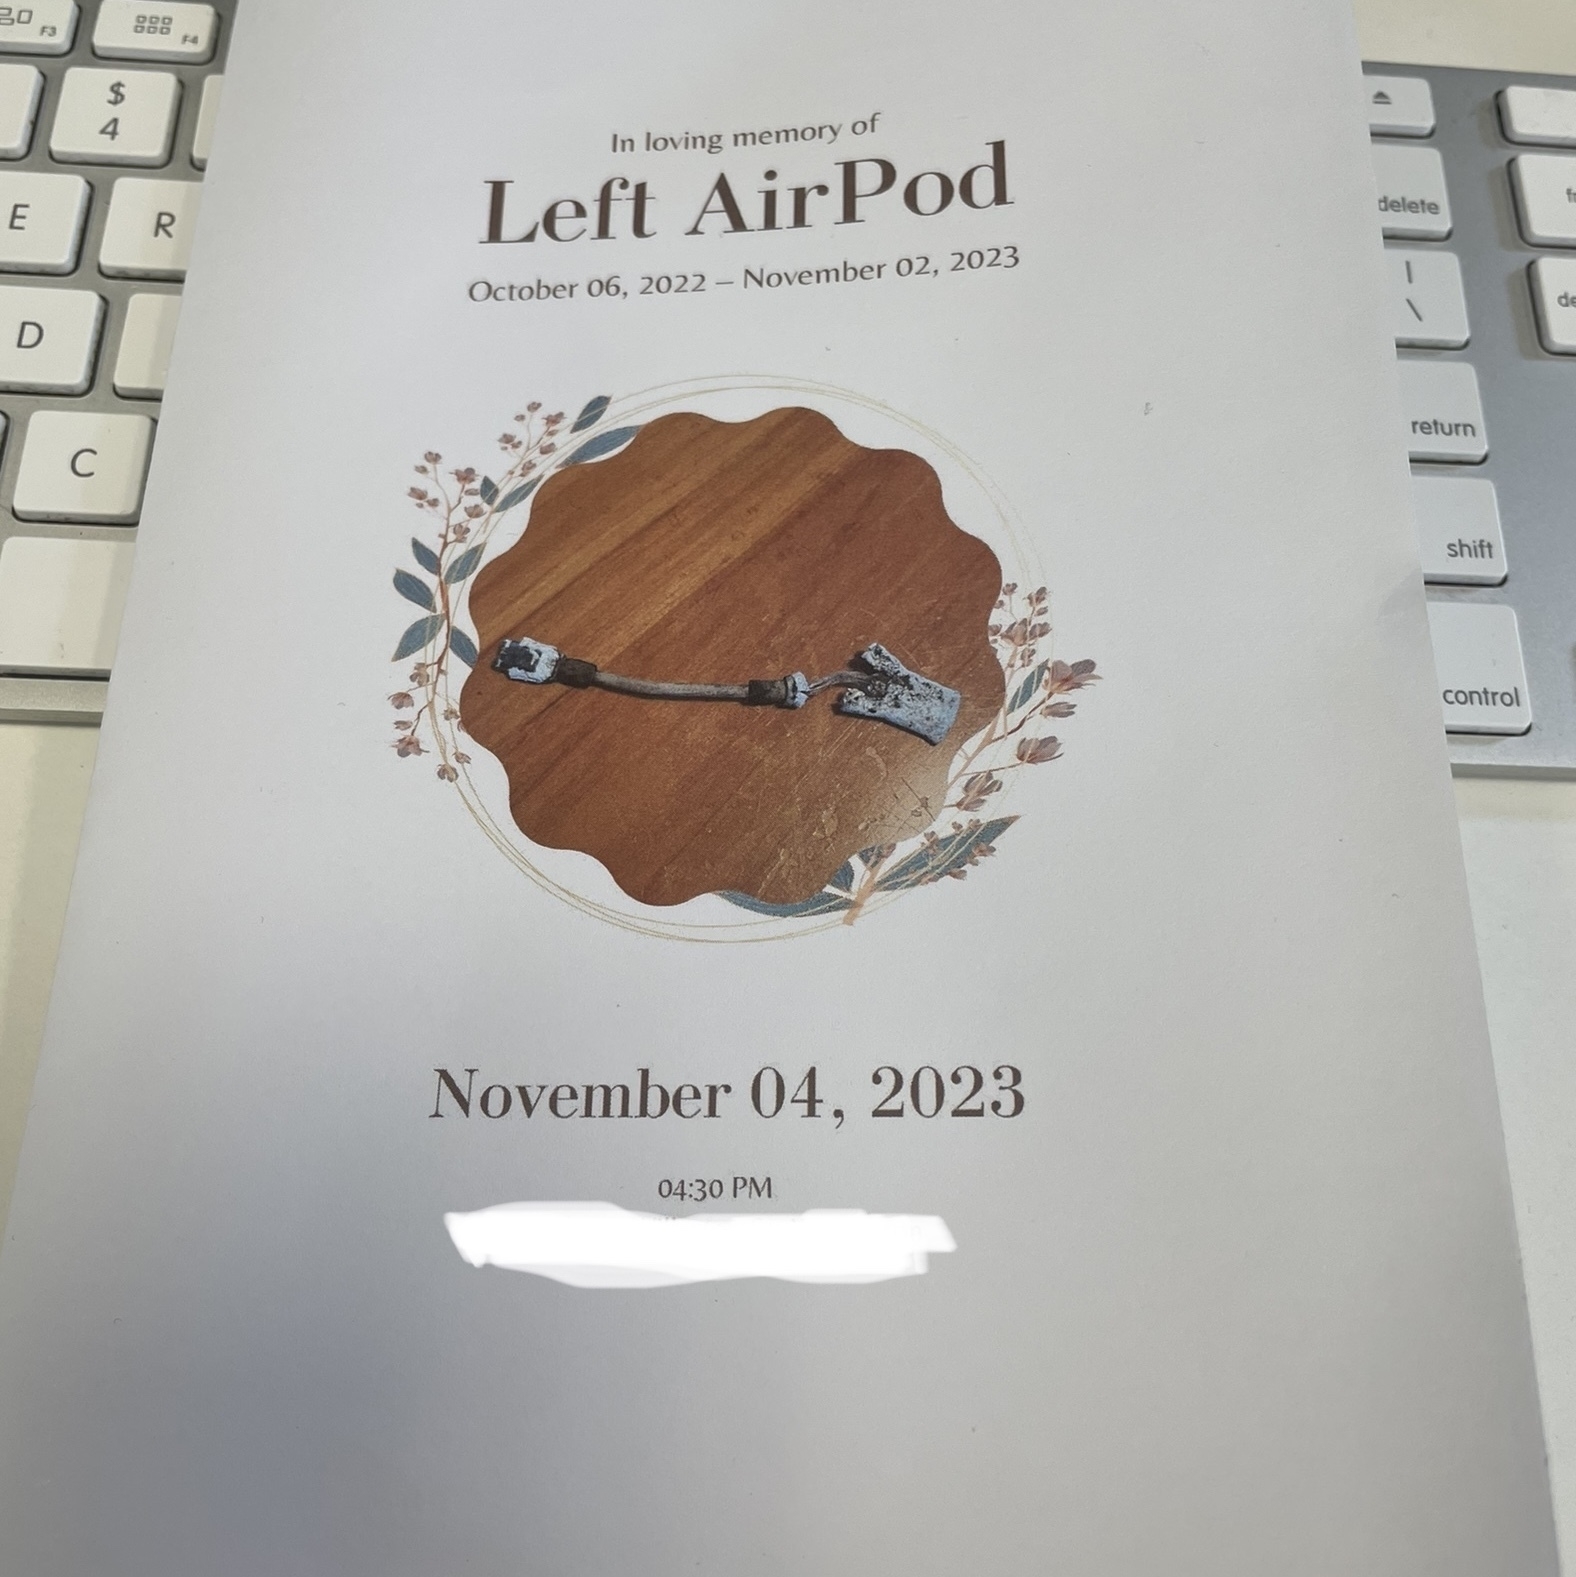 The memorial card for my left AirPod, as left in my desk. a card with a contred photo of my crished left AirPod and the words "In loving memory of Left AirPod October 06, 2022 - November 02, 2023"